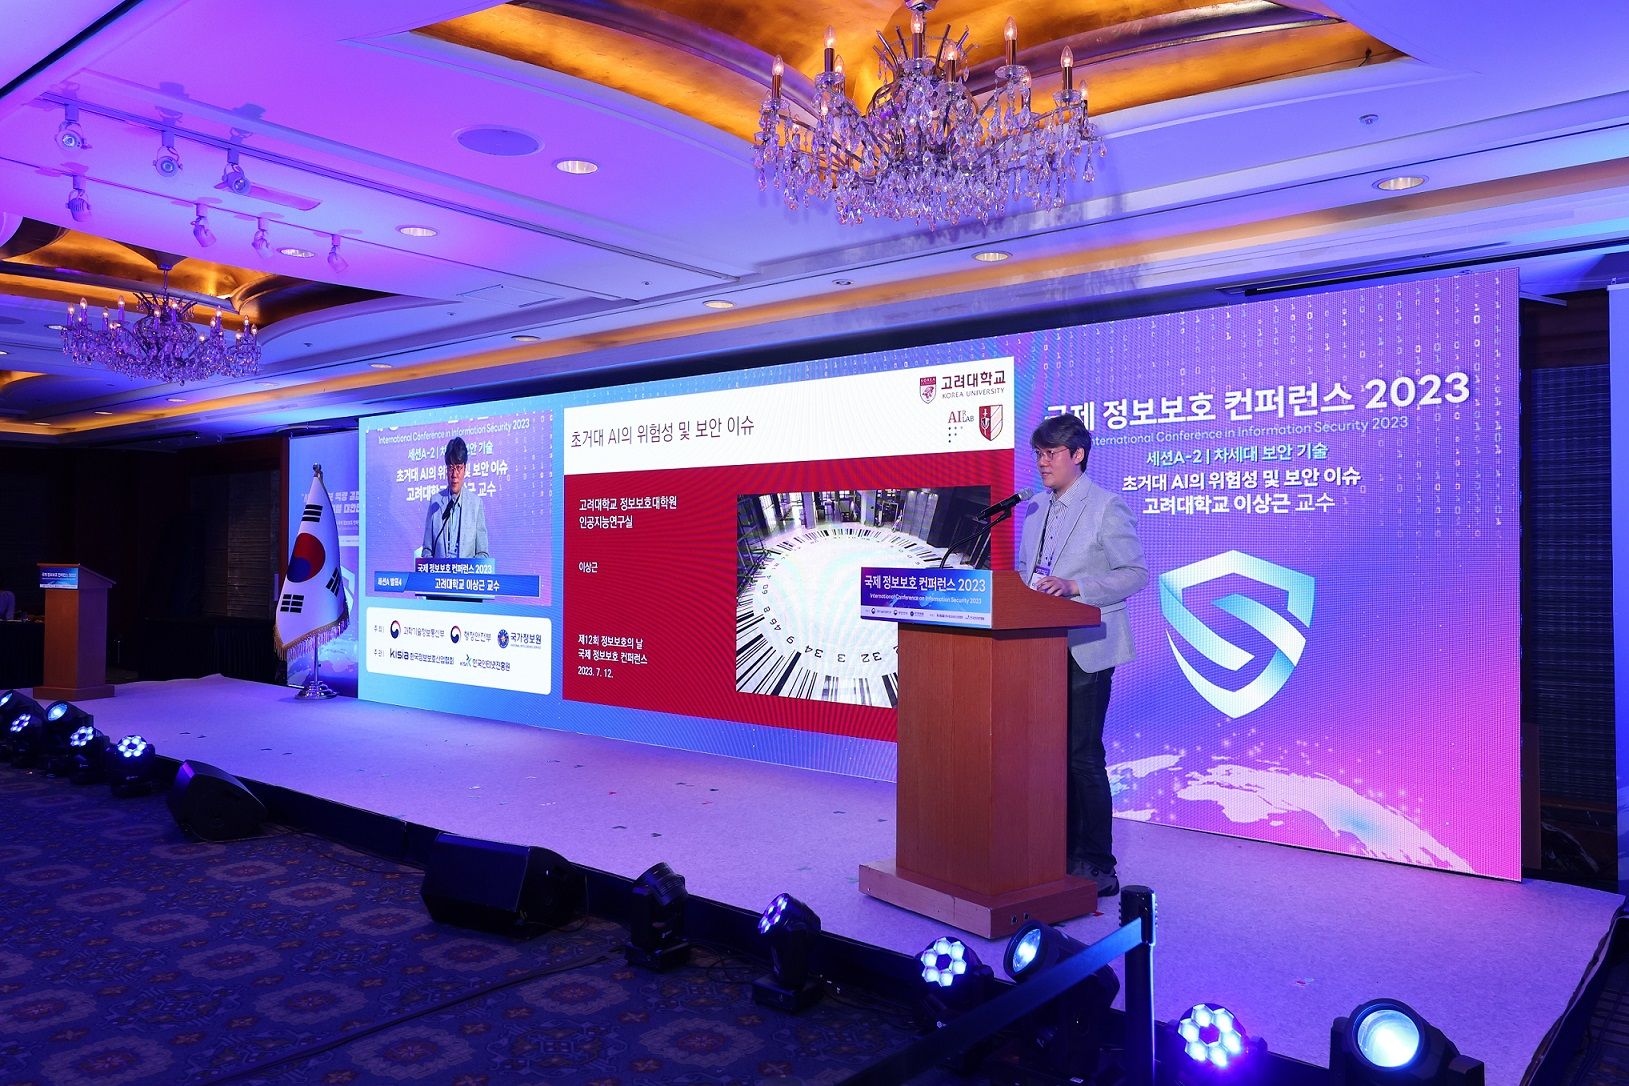 - Tackling phishing attacks becomes top priority for South Korea, expert asserts